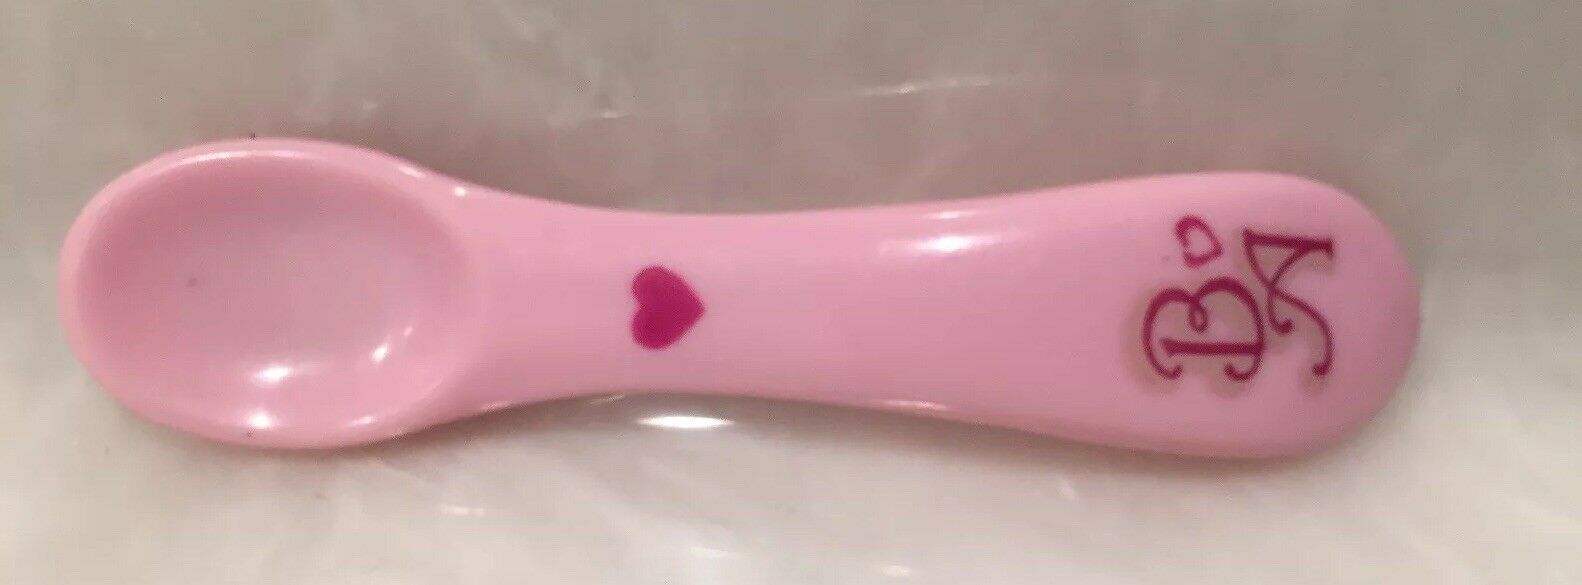 2006 Hasbro Baby Alive Pink Magnetic Spoon Replacement